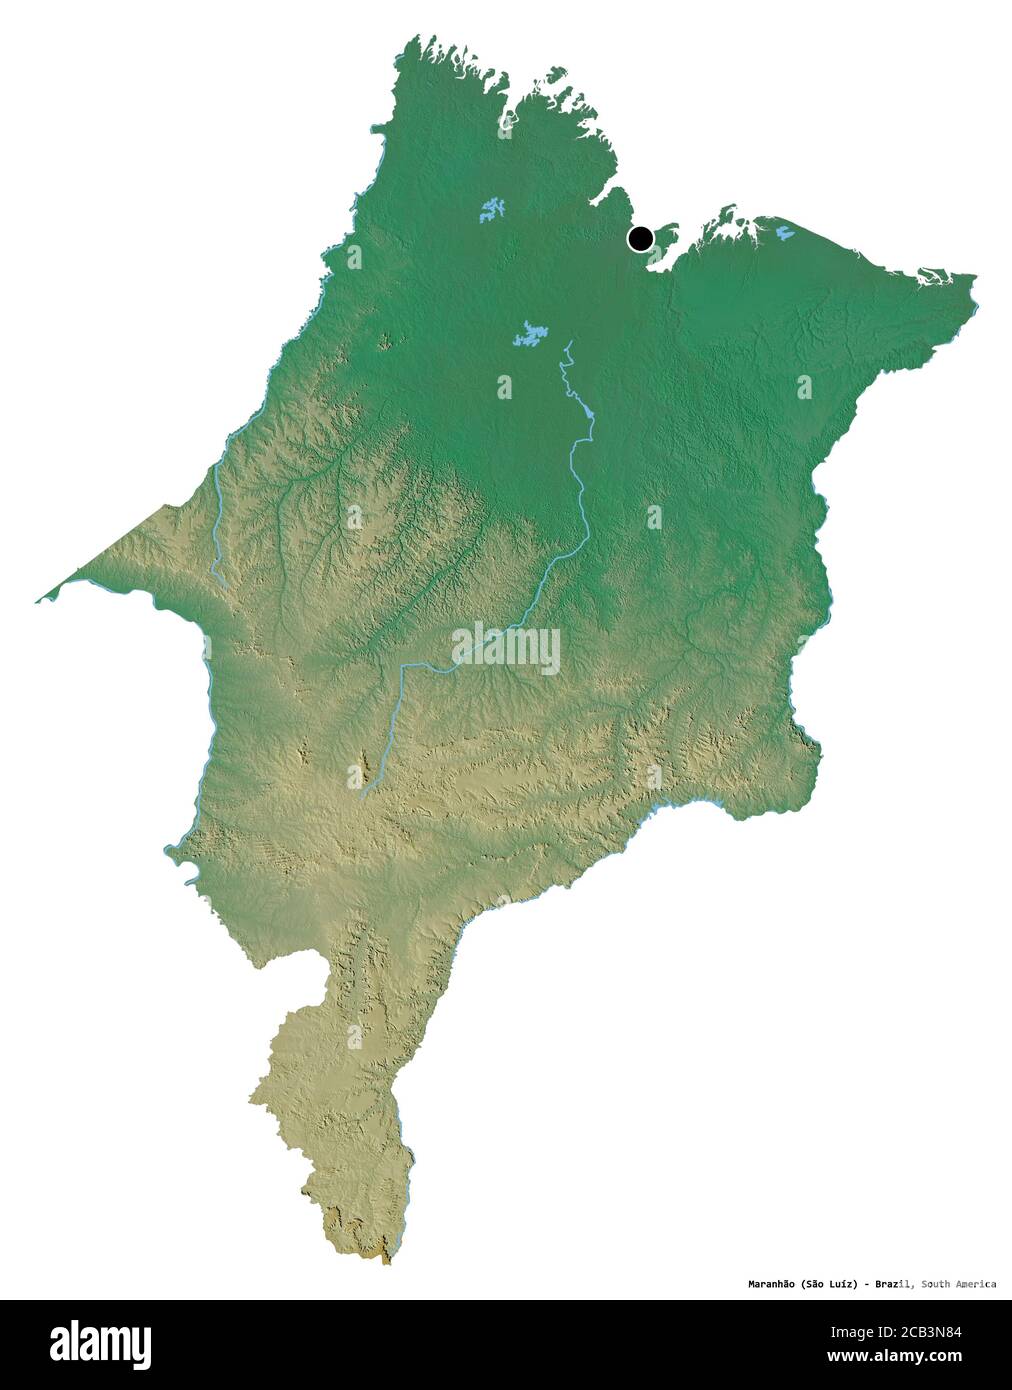 Shape of Maranhão, state of Brazil, with its capital isolated on white background. Topographic relief map. 3D rendering Stock Photo